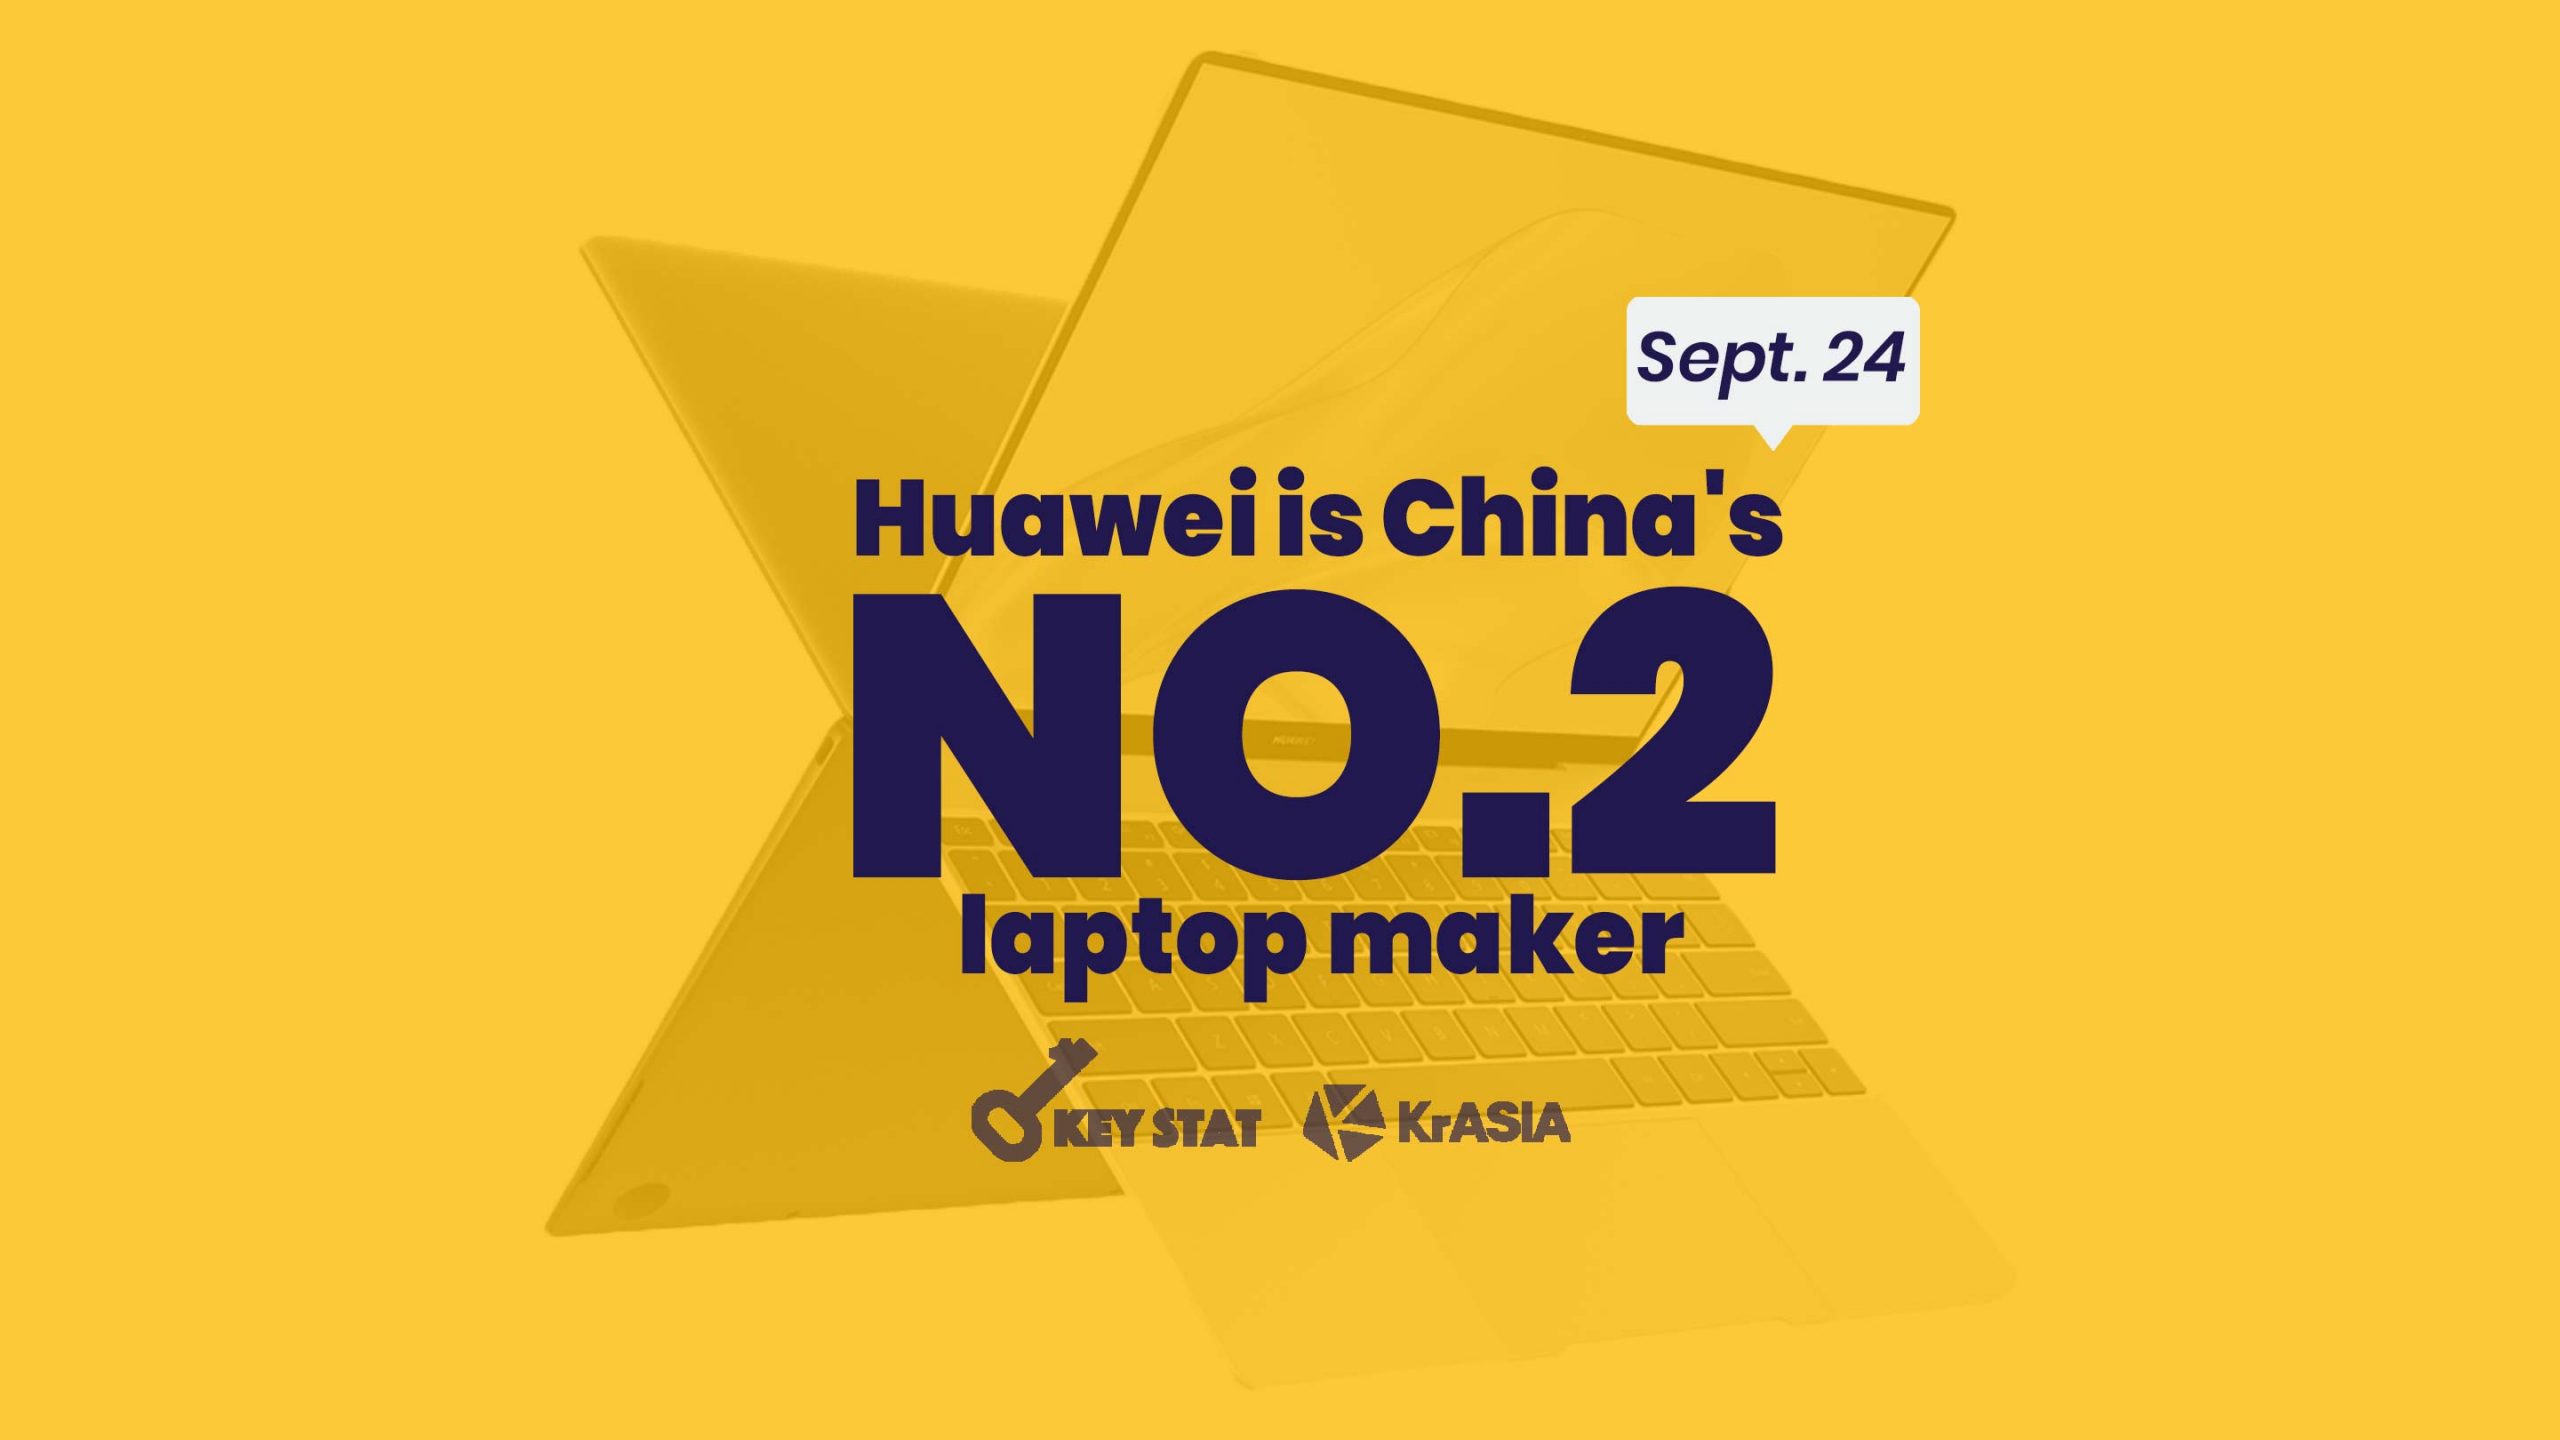 KEY STAT | Huawei said it’s the second largest laptop vendor in China